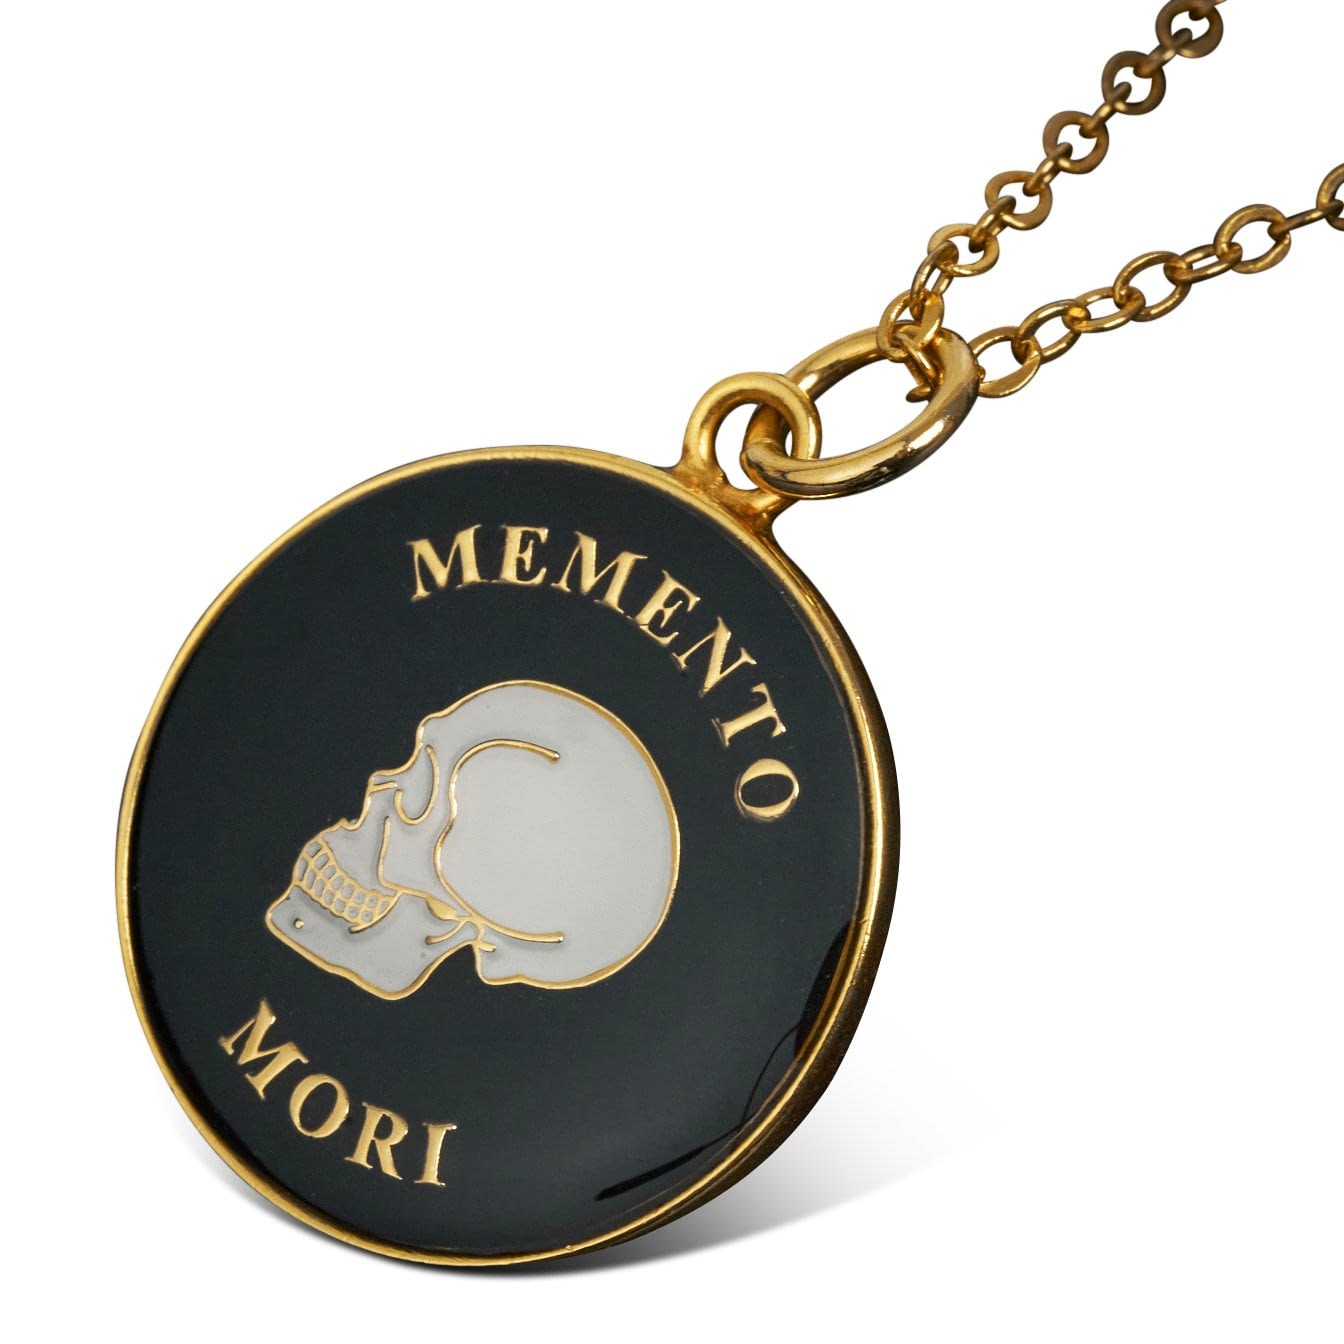 stoic-amor-fati-gold-plated-enamelled-black-pendant-necklace